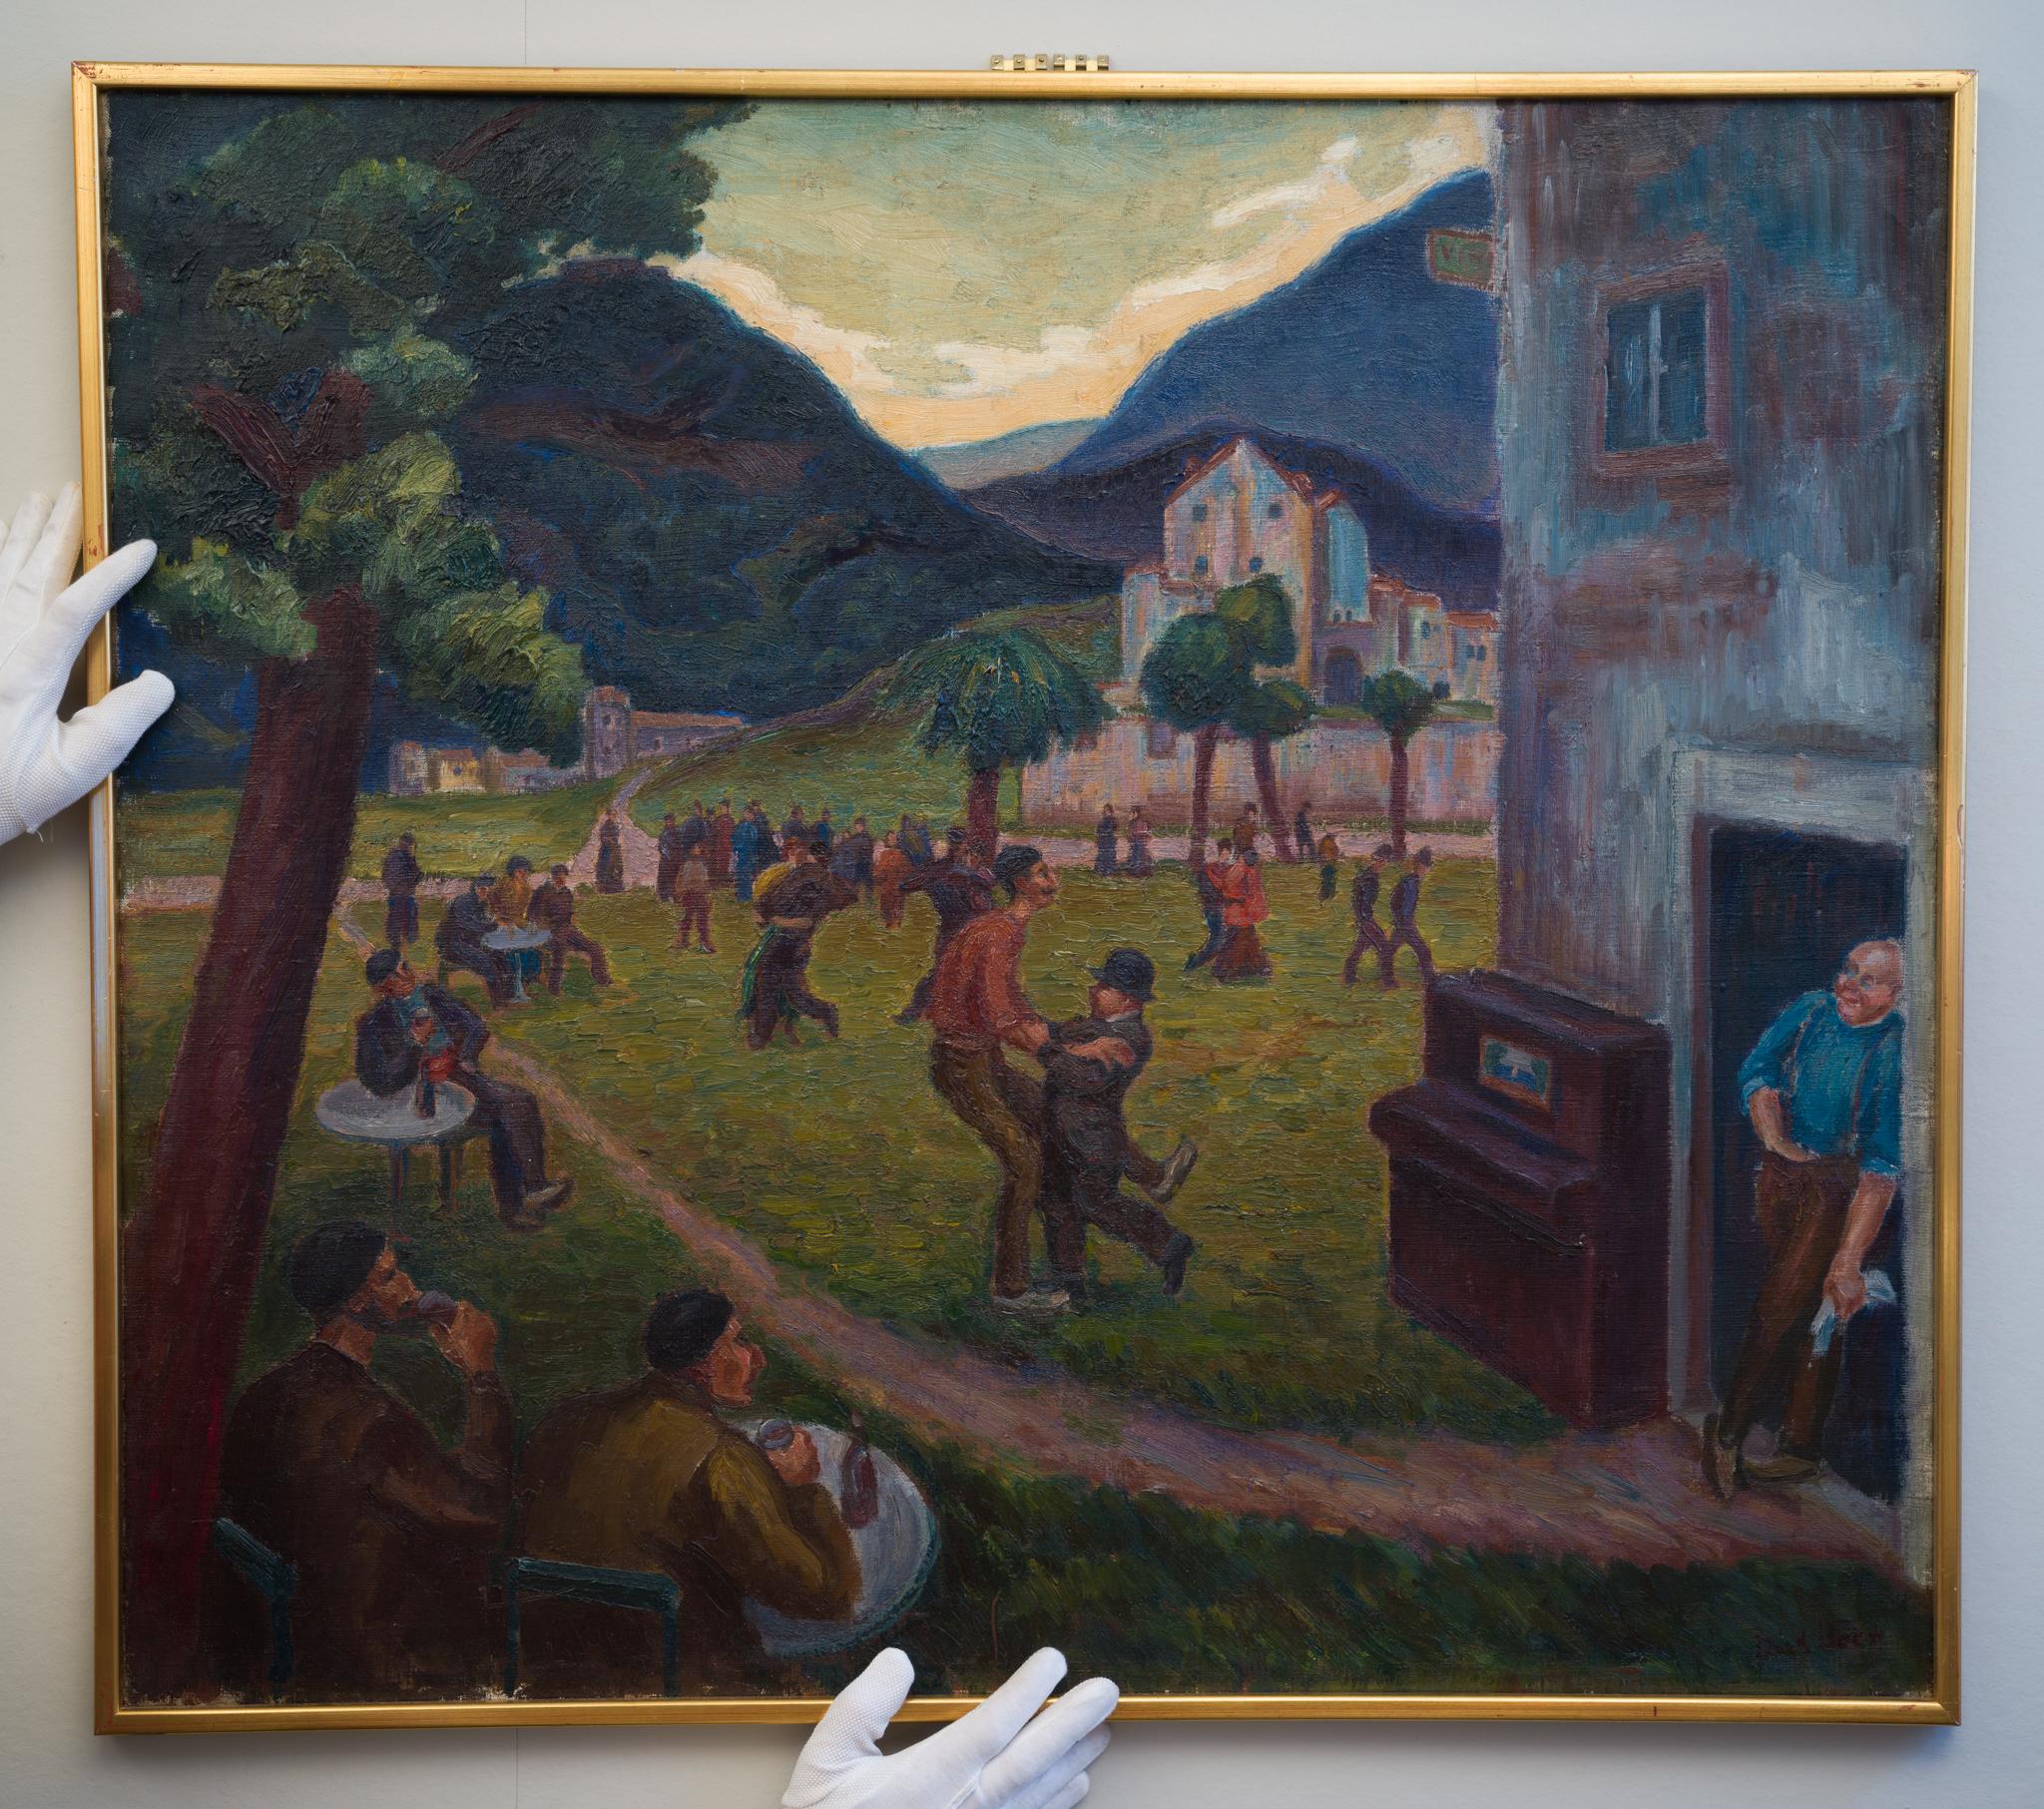 Popular Dance at Corsica, I. By Swedish Artist Dick Beer, c.1924 For Sale 2